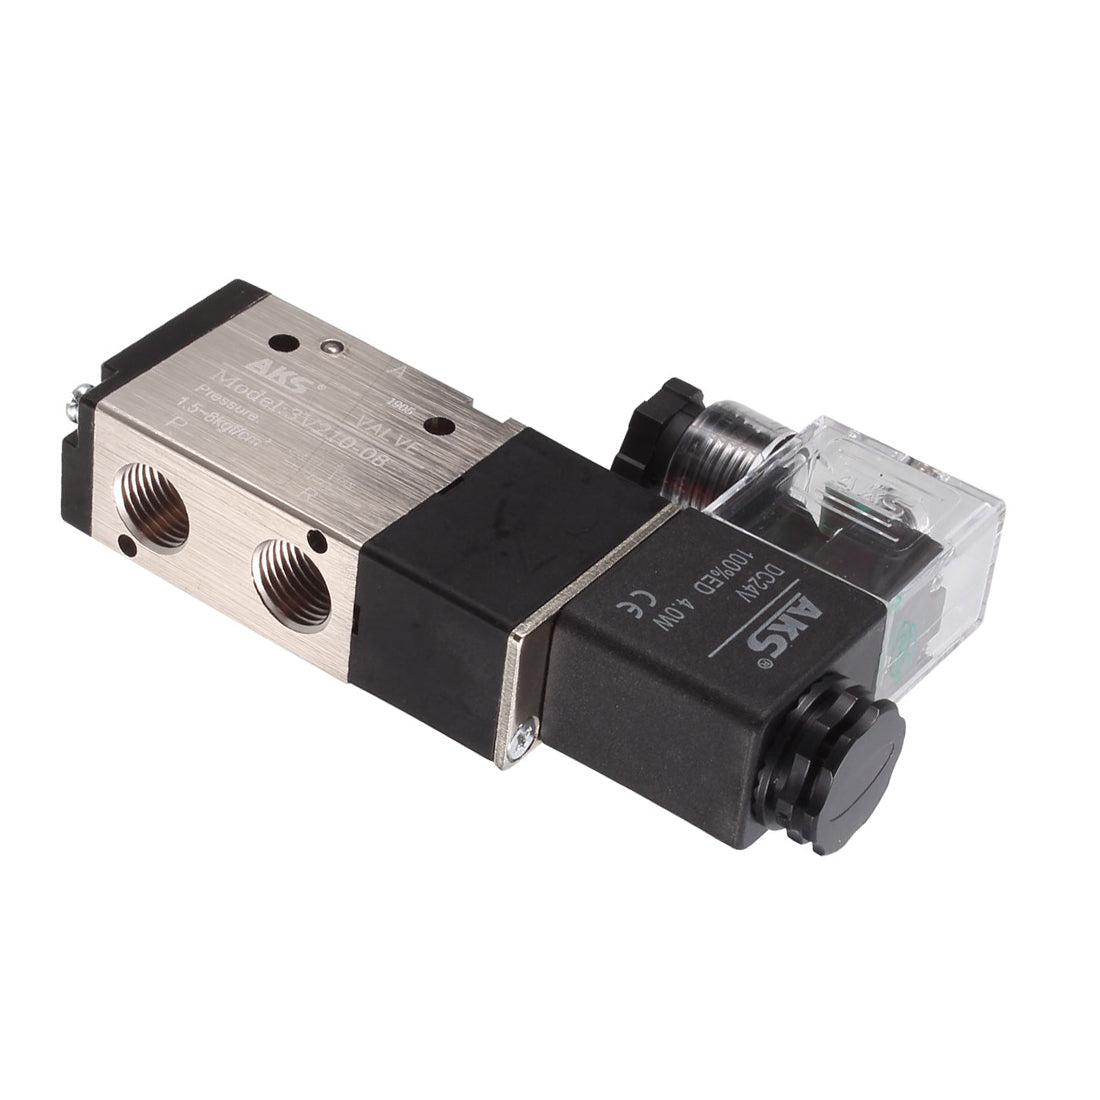 uxcell Uxcell 3V210-08 Pneumatic Air NC Single Electrical Control Solenoid Valve DC 24V 3 Way 2 Position 1/4" G  Thread Internally Piloted Acting Type